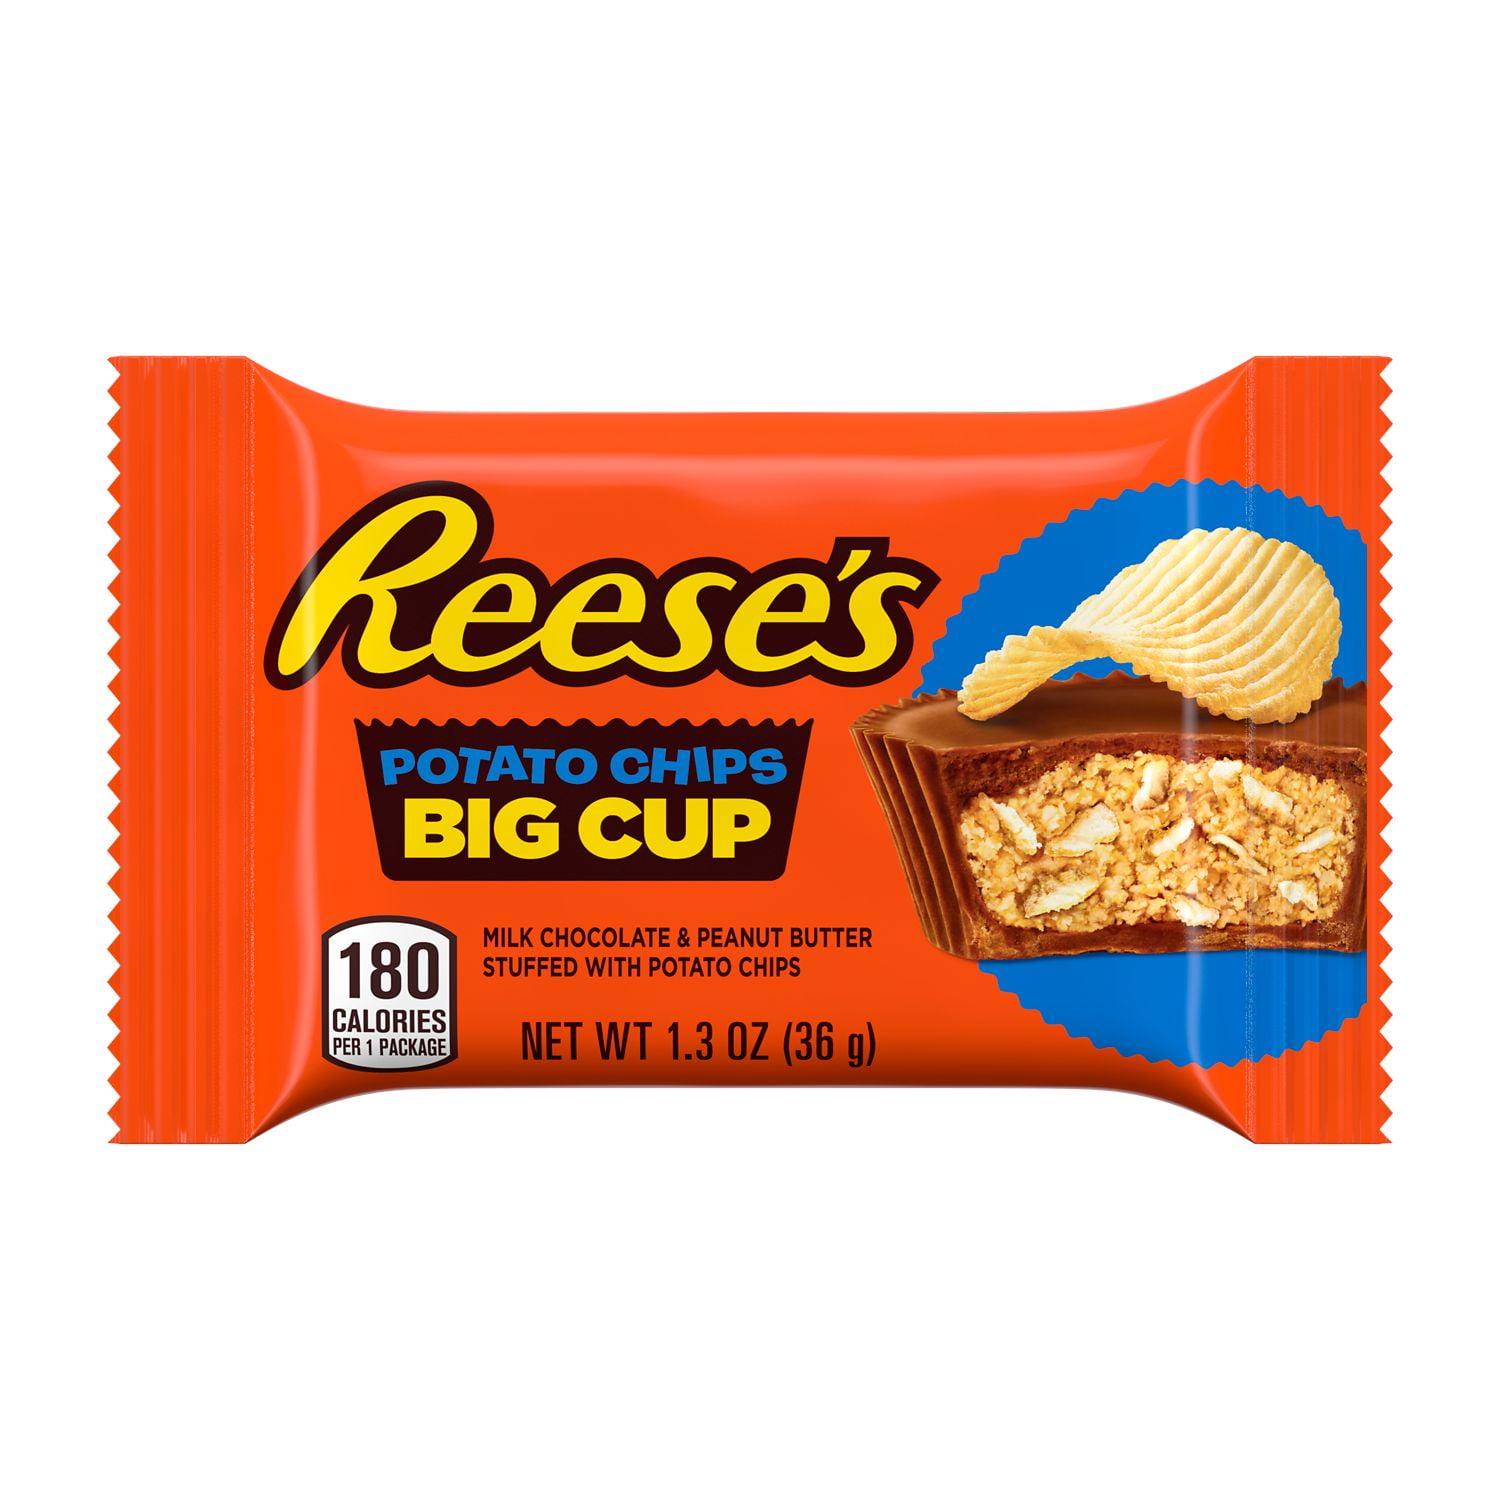 REESE'S, Big Cup Milk Chocolate Peanut Butter with Potato Chips Cups Candy, Gluten Free, 1.3 oz, Pack